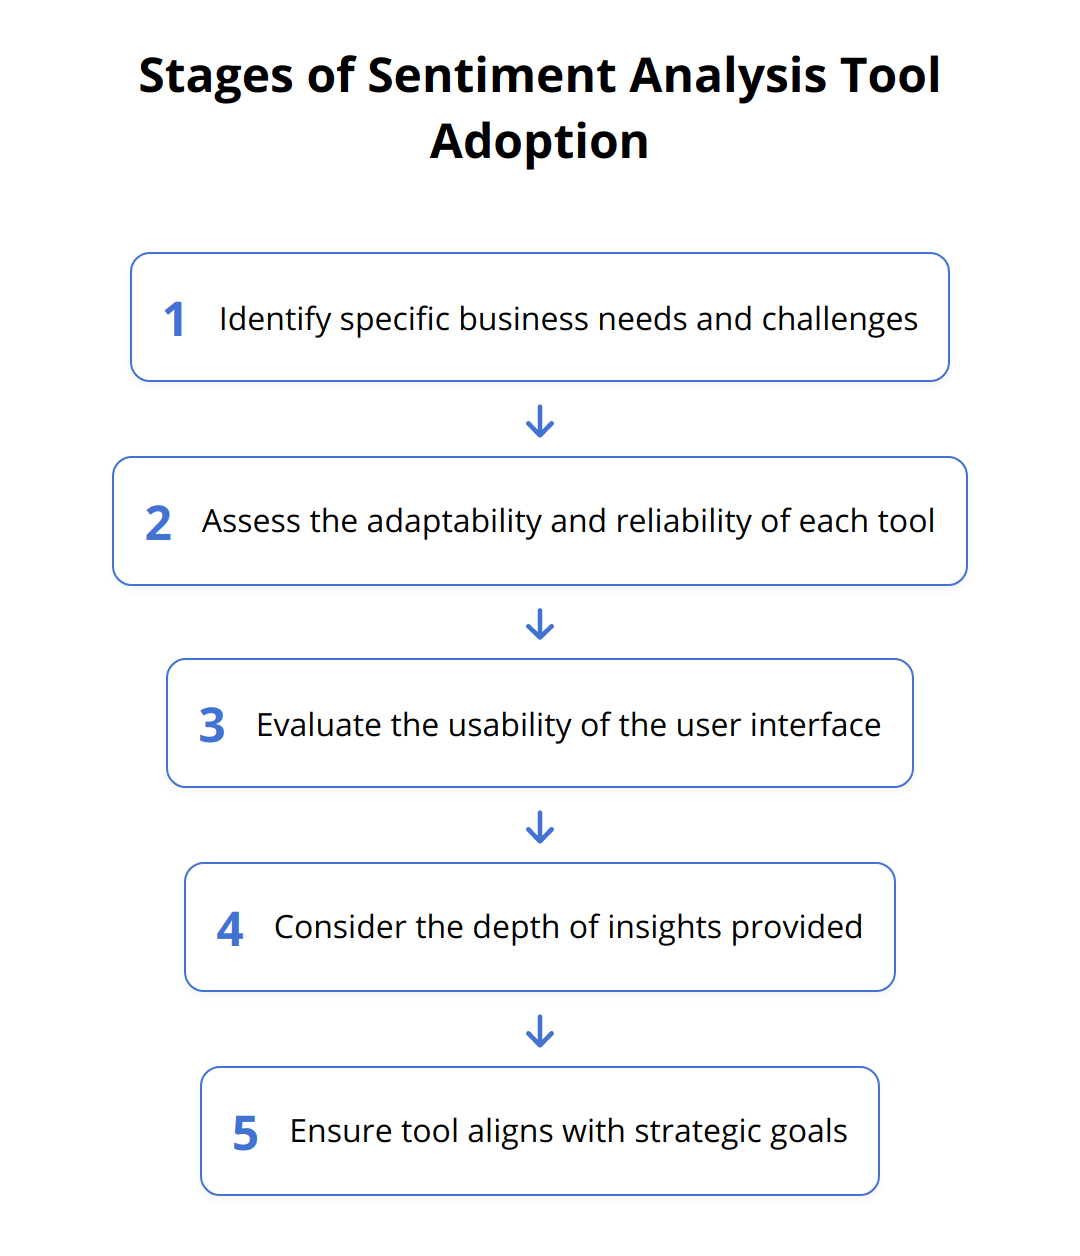 Flow Chart - Stages of Sentiment Analysis Tool Adoption